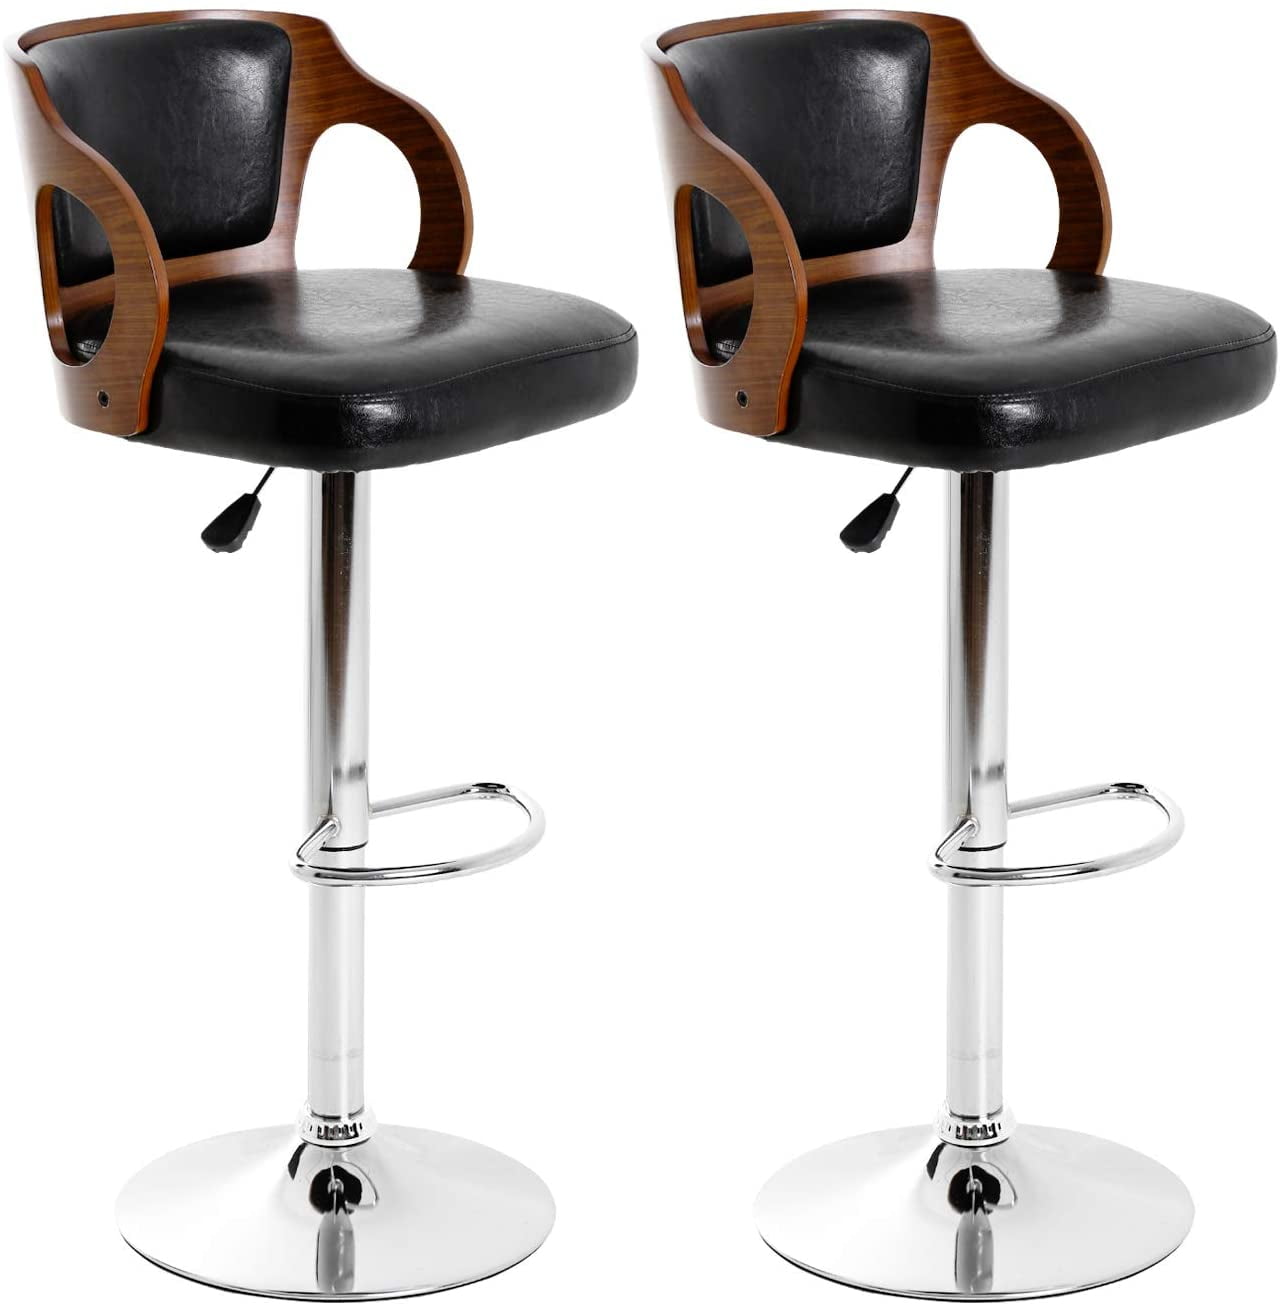 Set of 2 Bar Stools Counter Height Adjustable Leather Swivel Dining Chair 